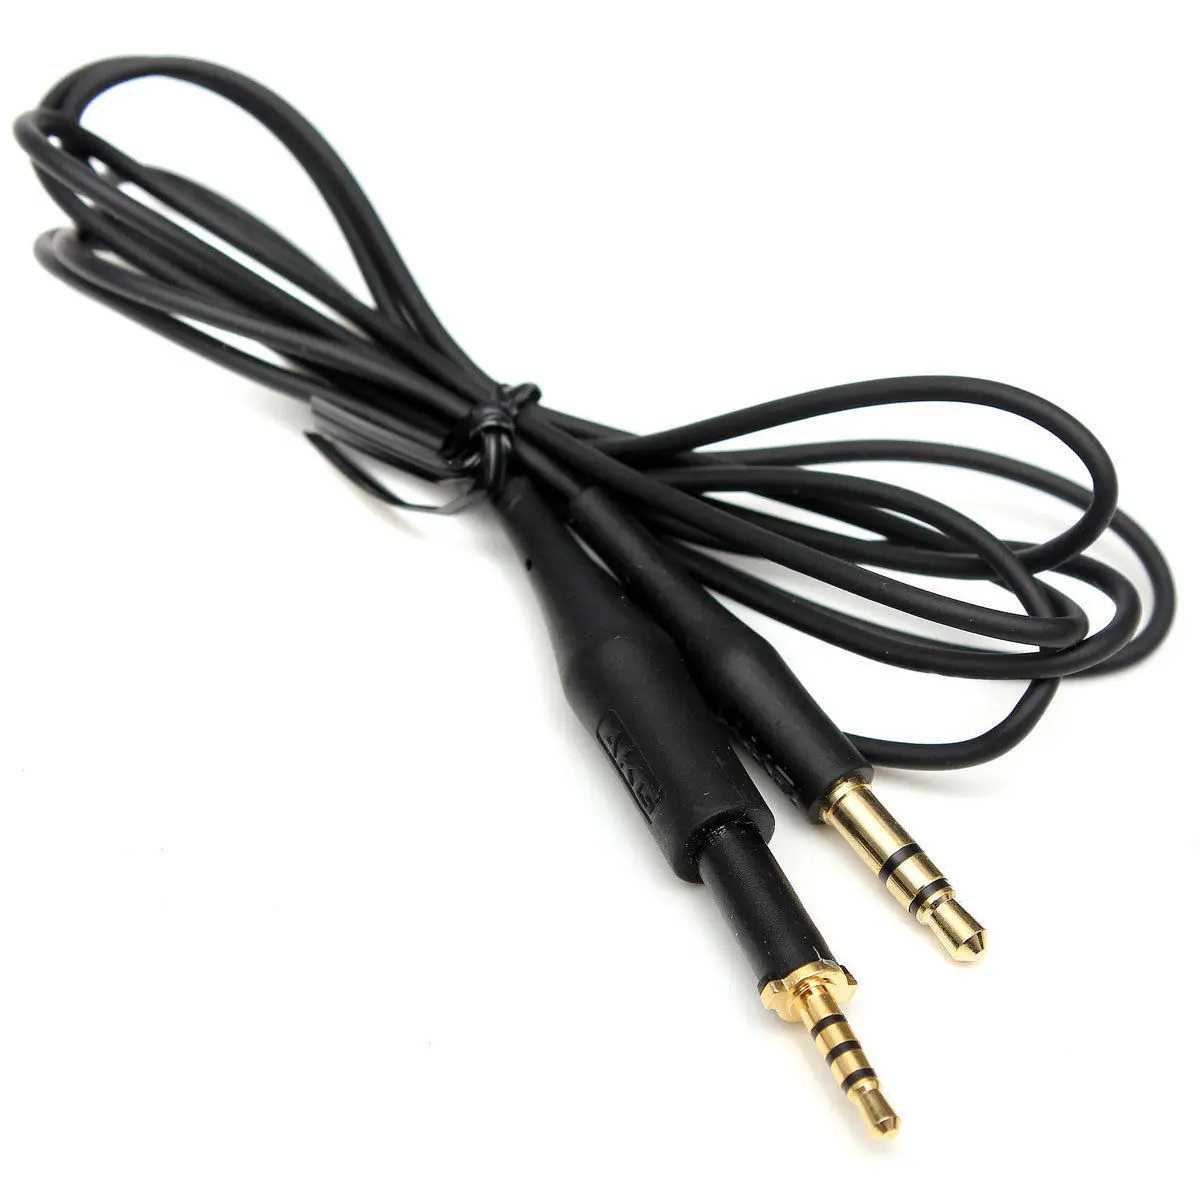 

2.5mm to 3.5mm Replacemen Audio Cable Fit For AKG K450 K451 K452 K480 Q460 Headphones Headphone Cable